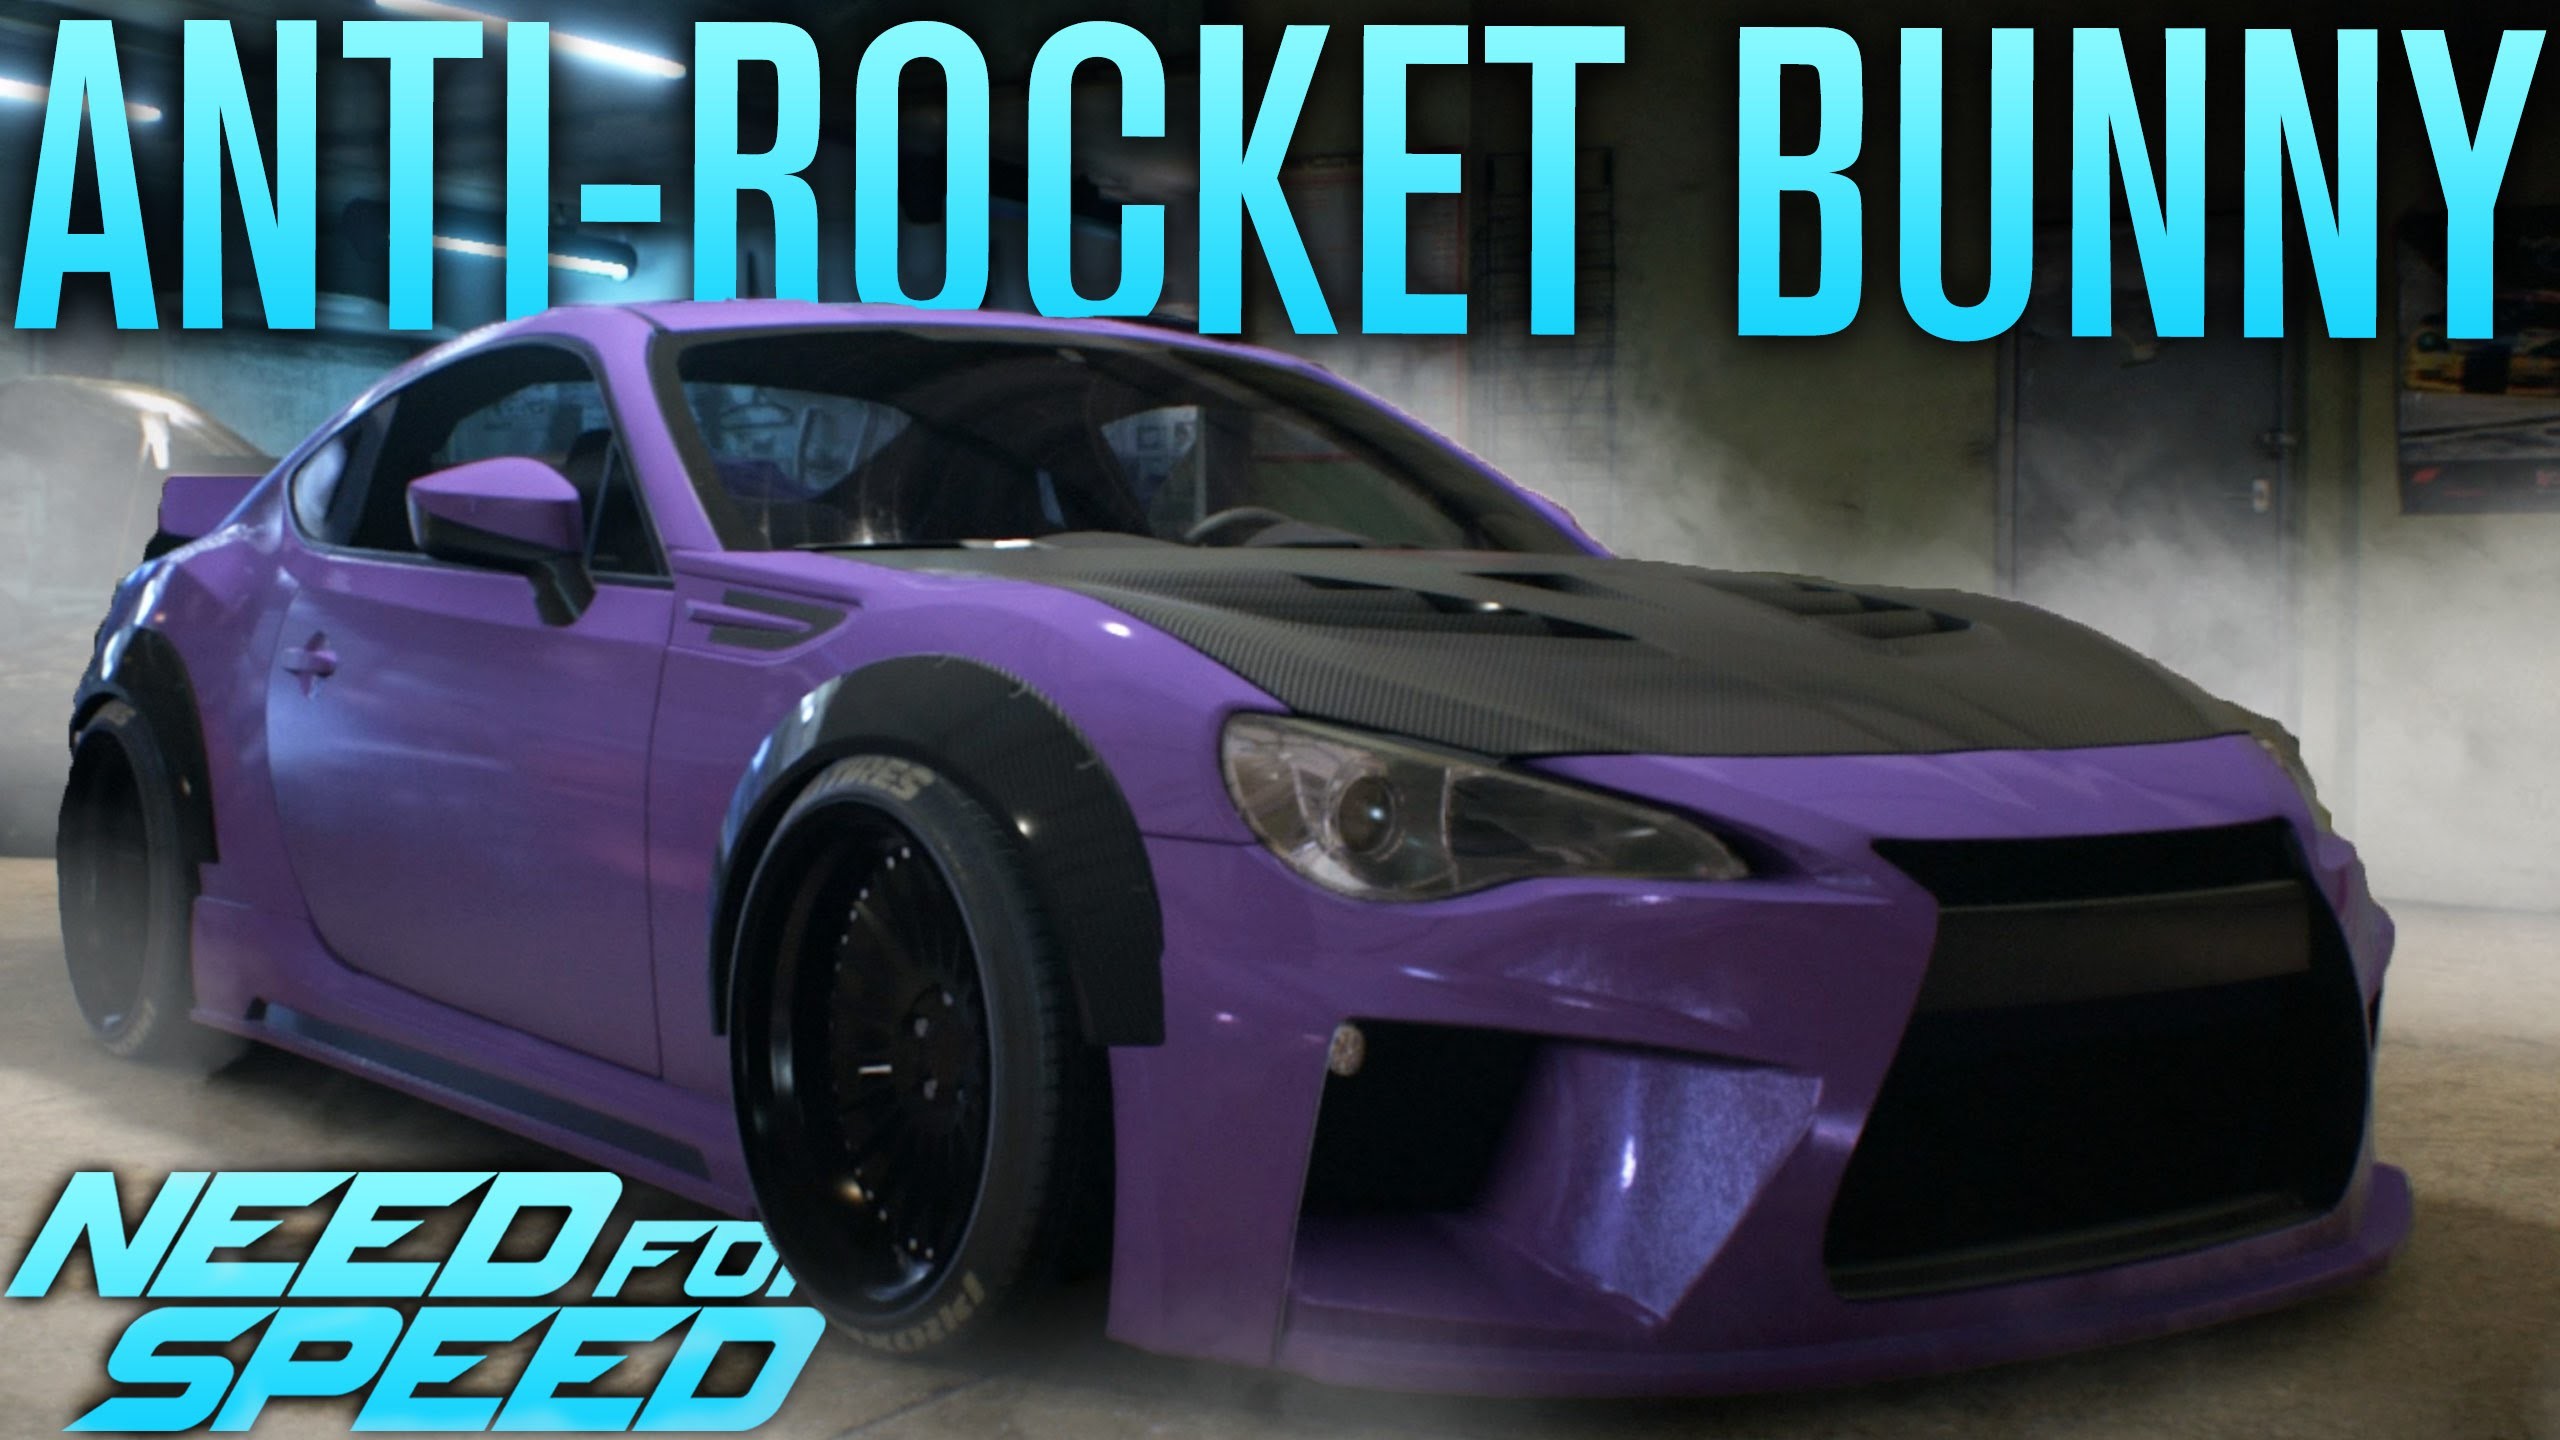 2560x1440 ANTI-ROCKET BUNNY & NOS SCION FRS DRIFT BUILD! | Need for Speed 2015  Gameplay - YouTube